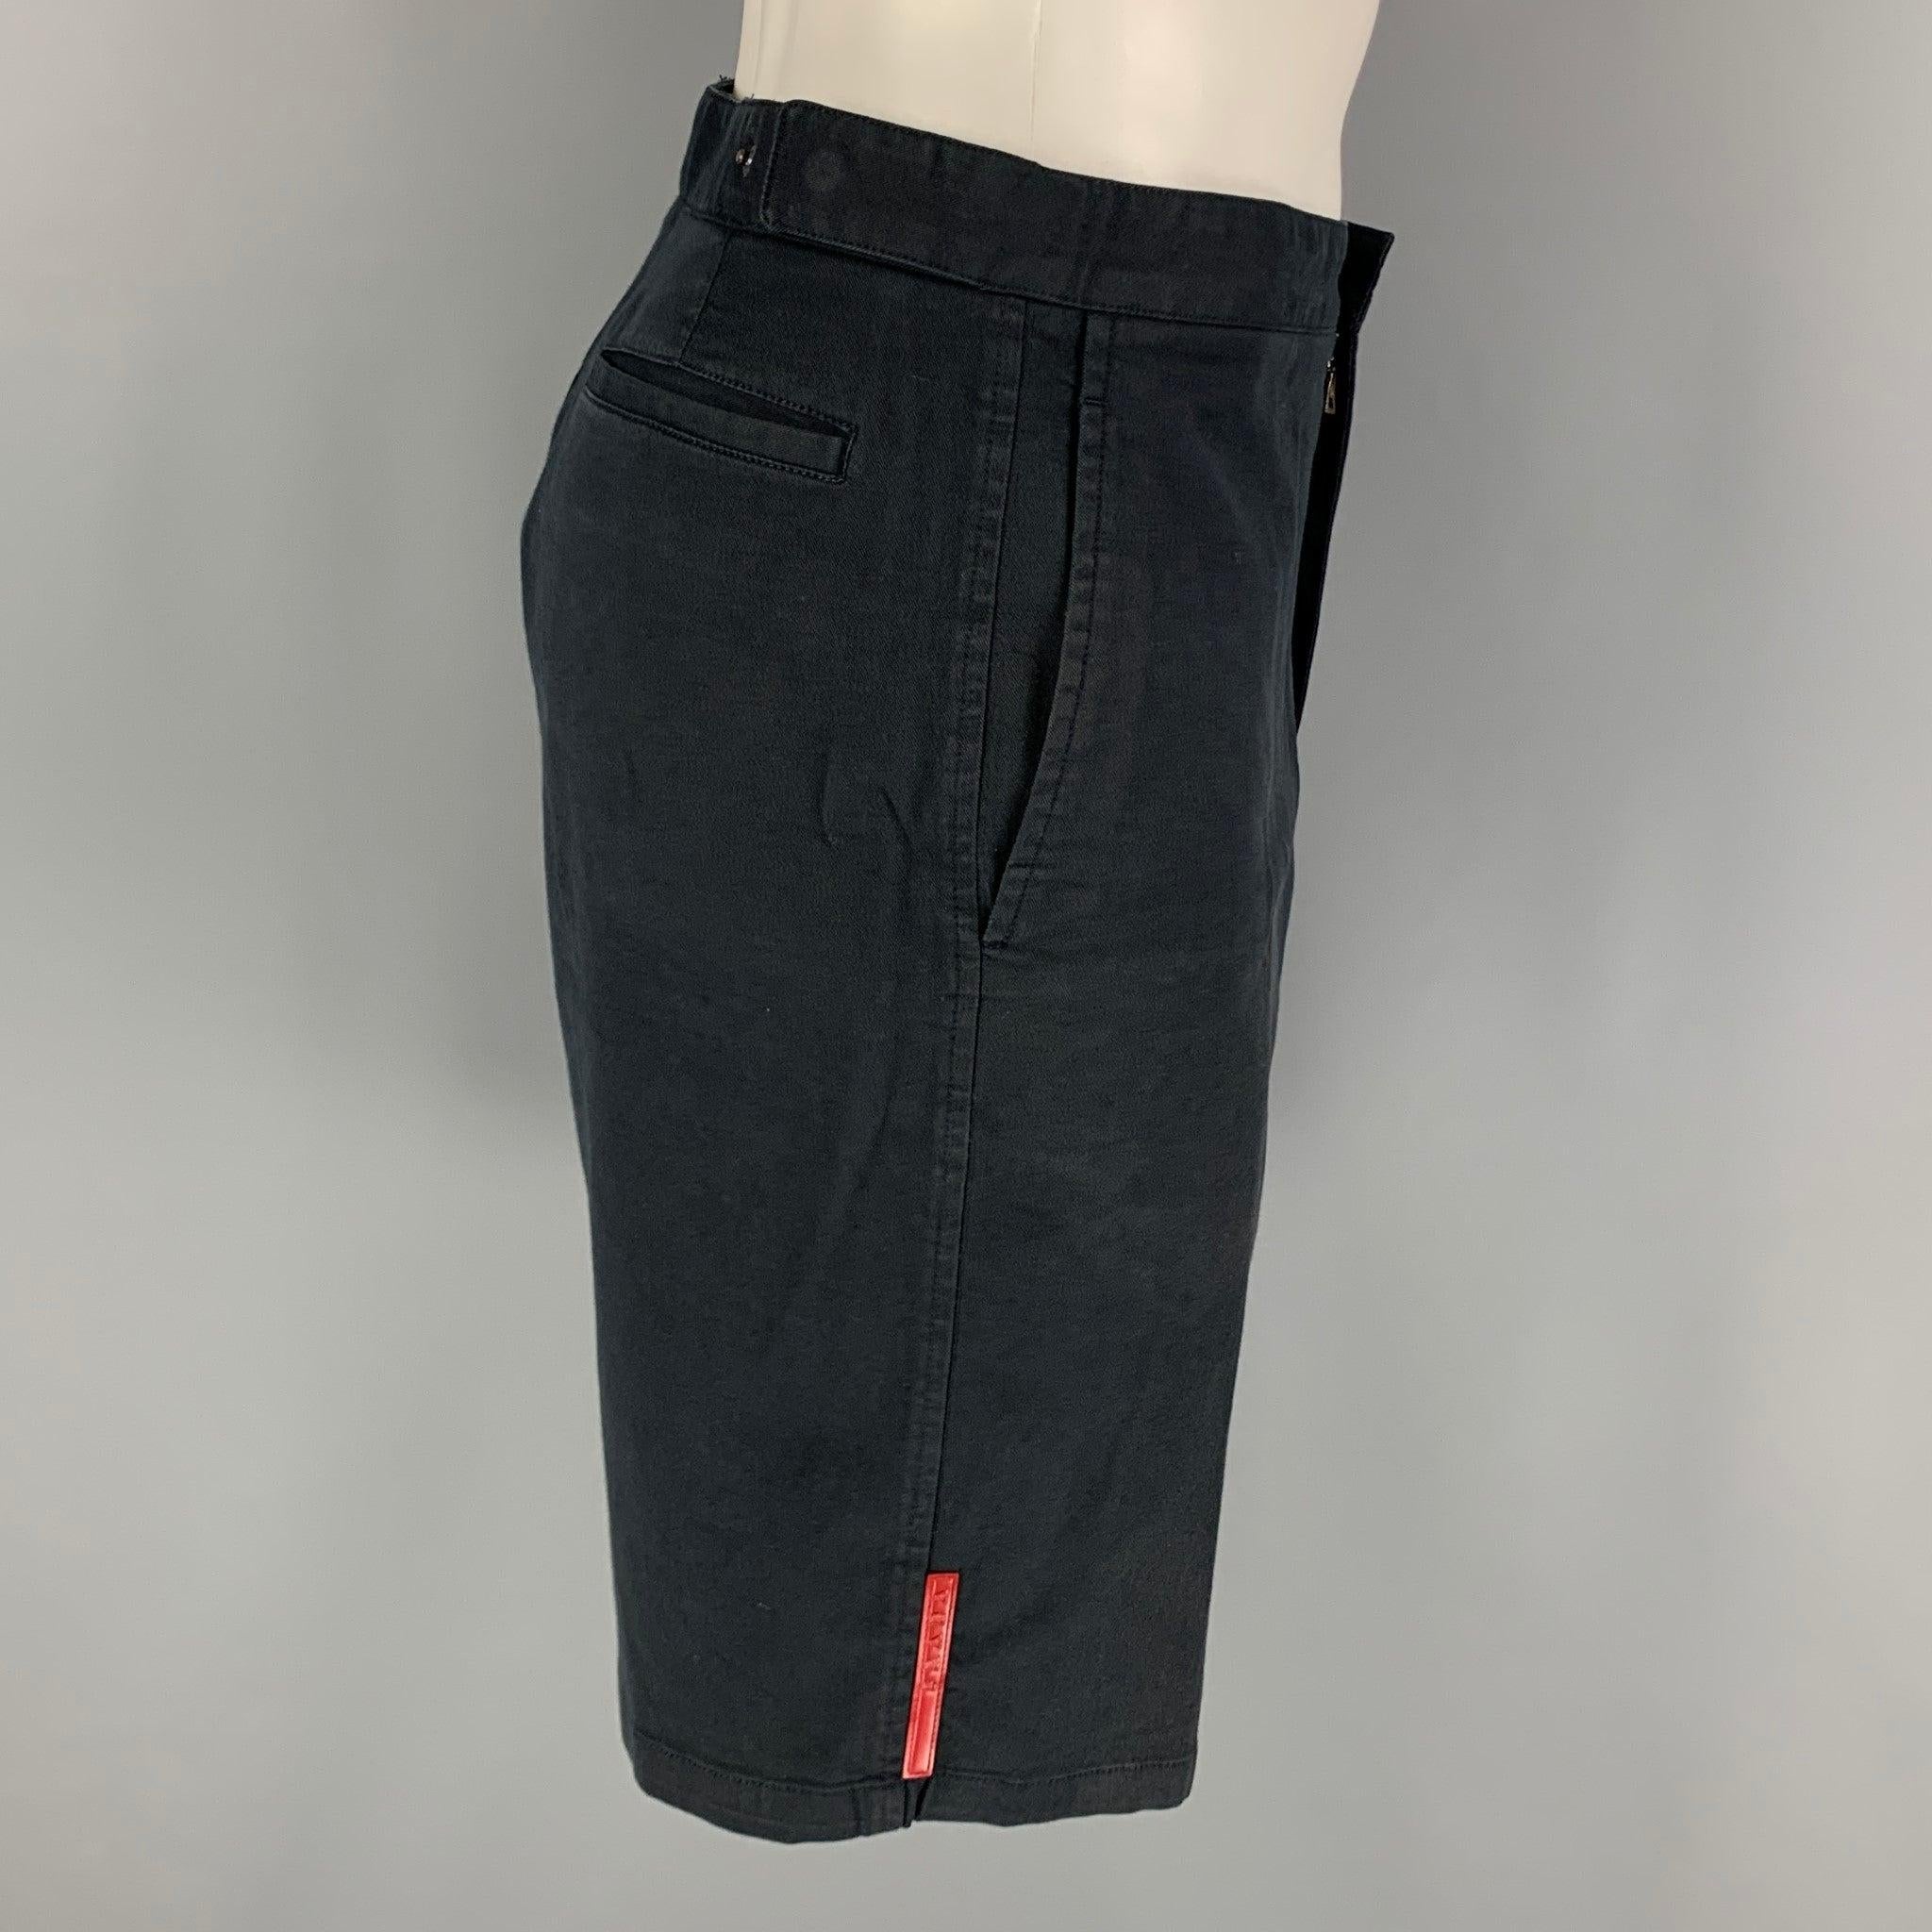 PRADA SPORT shorts comes in a navy cotton twill material with a side pockets, flat front, and zip up fly closure. Very Good Pre-Owned Condition. Moderate color fading. 

Marked:   50 

Measurements: 
  Waist: 32 inches Rise: 10 inches Inseam: 10.5